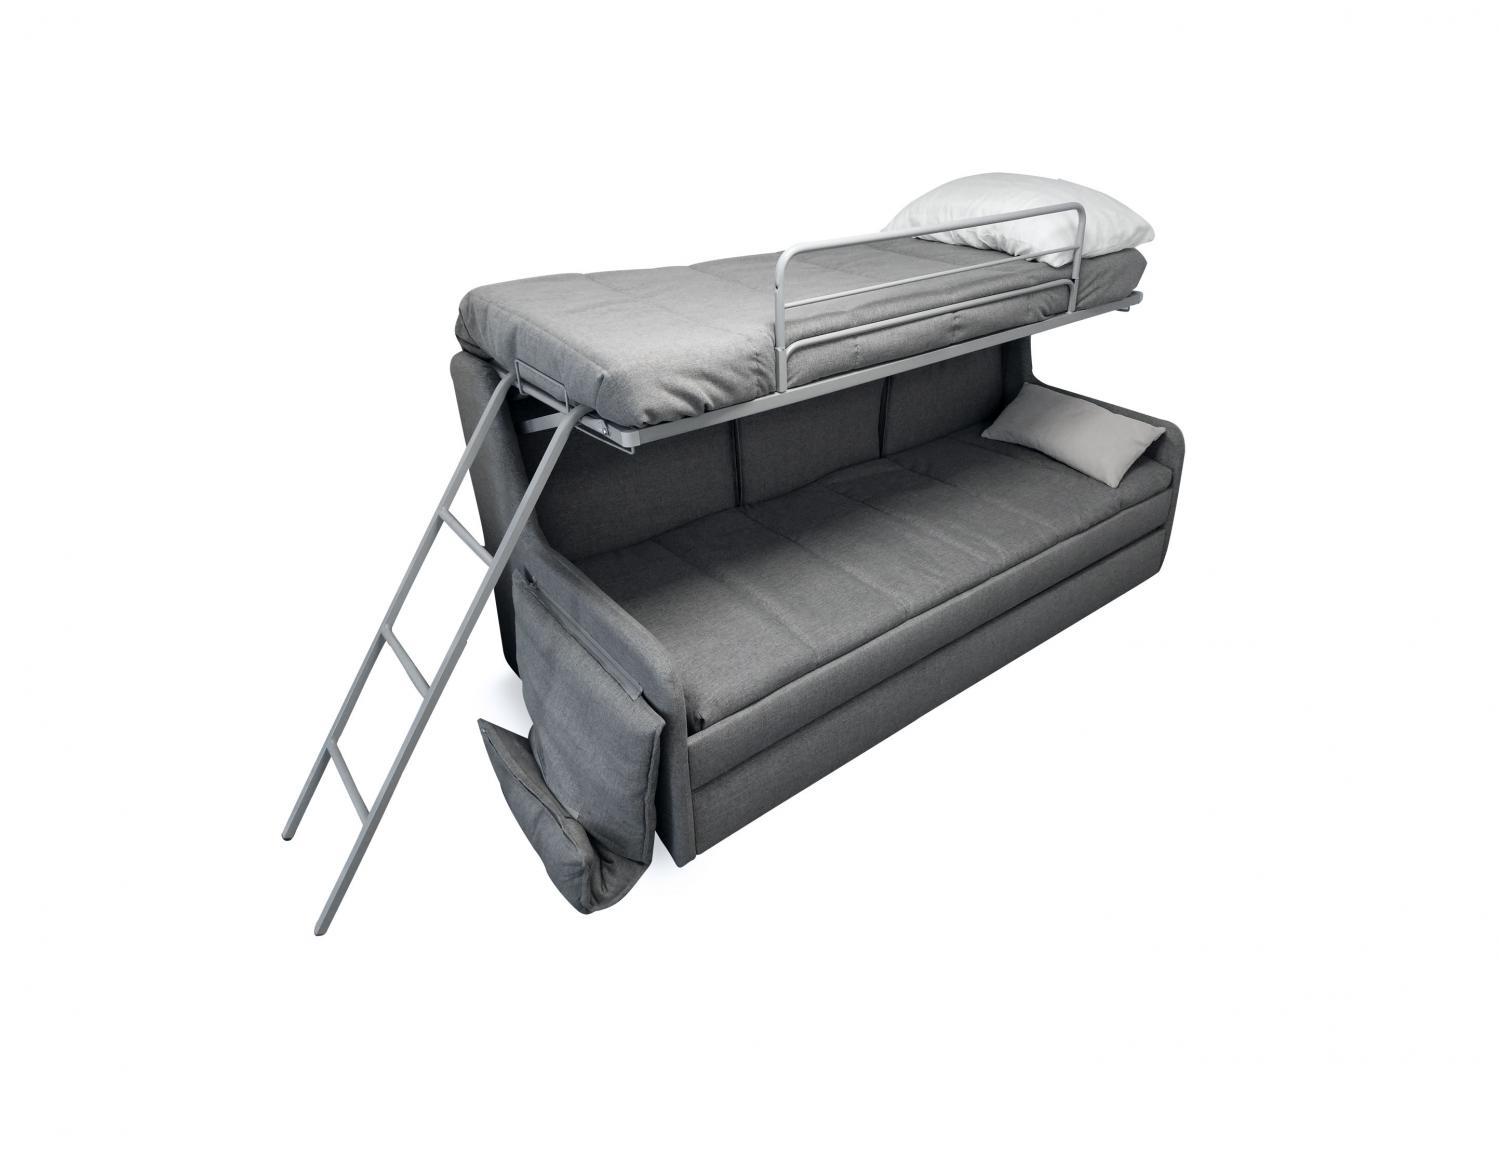 This Transforming Bunk Bed Sleeps 3 And, Bunk Beds That Turn Into A Sofa